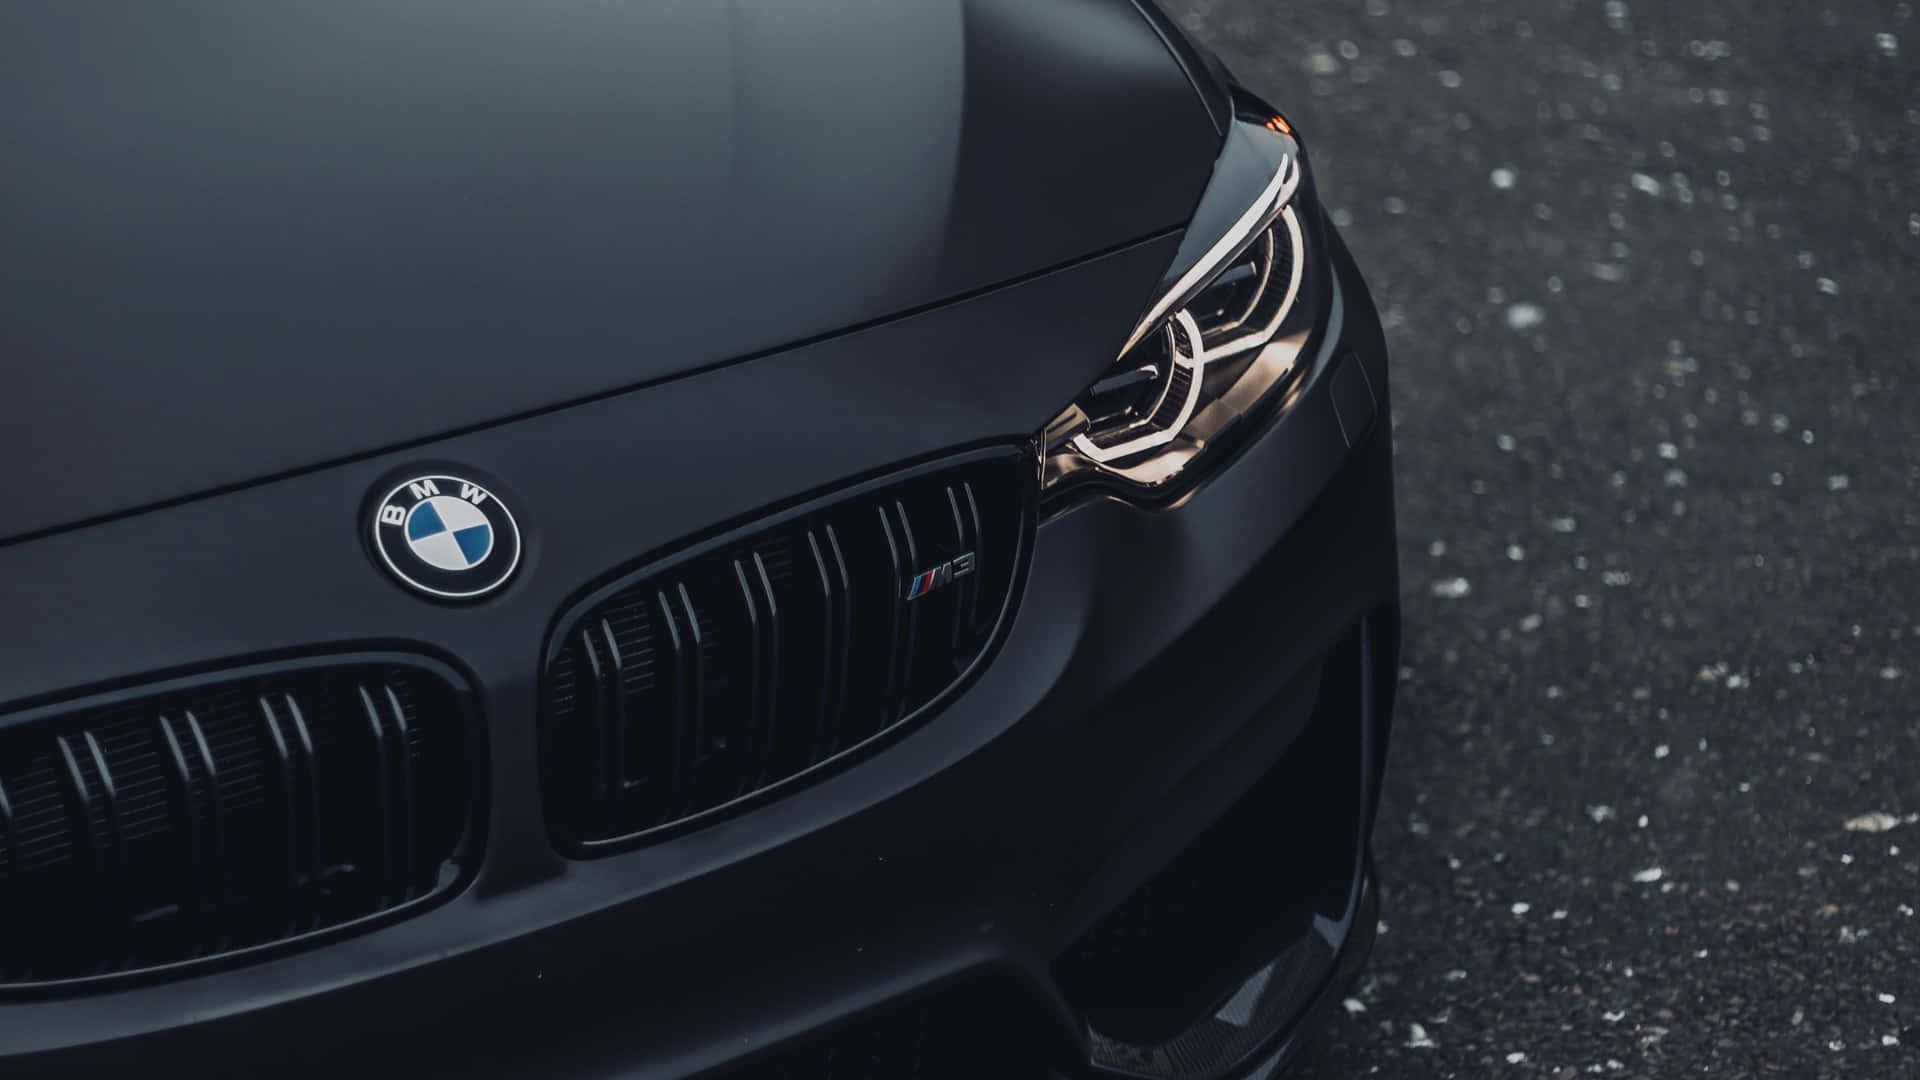 Get ready for the ride of your life with this sleek 4K BMW